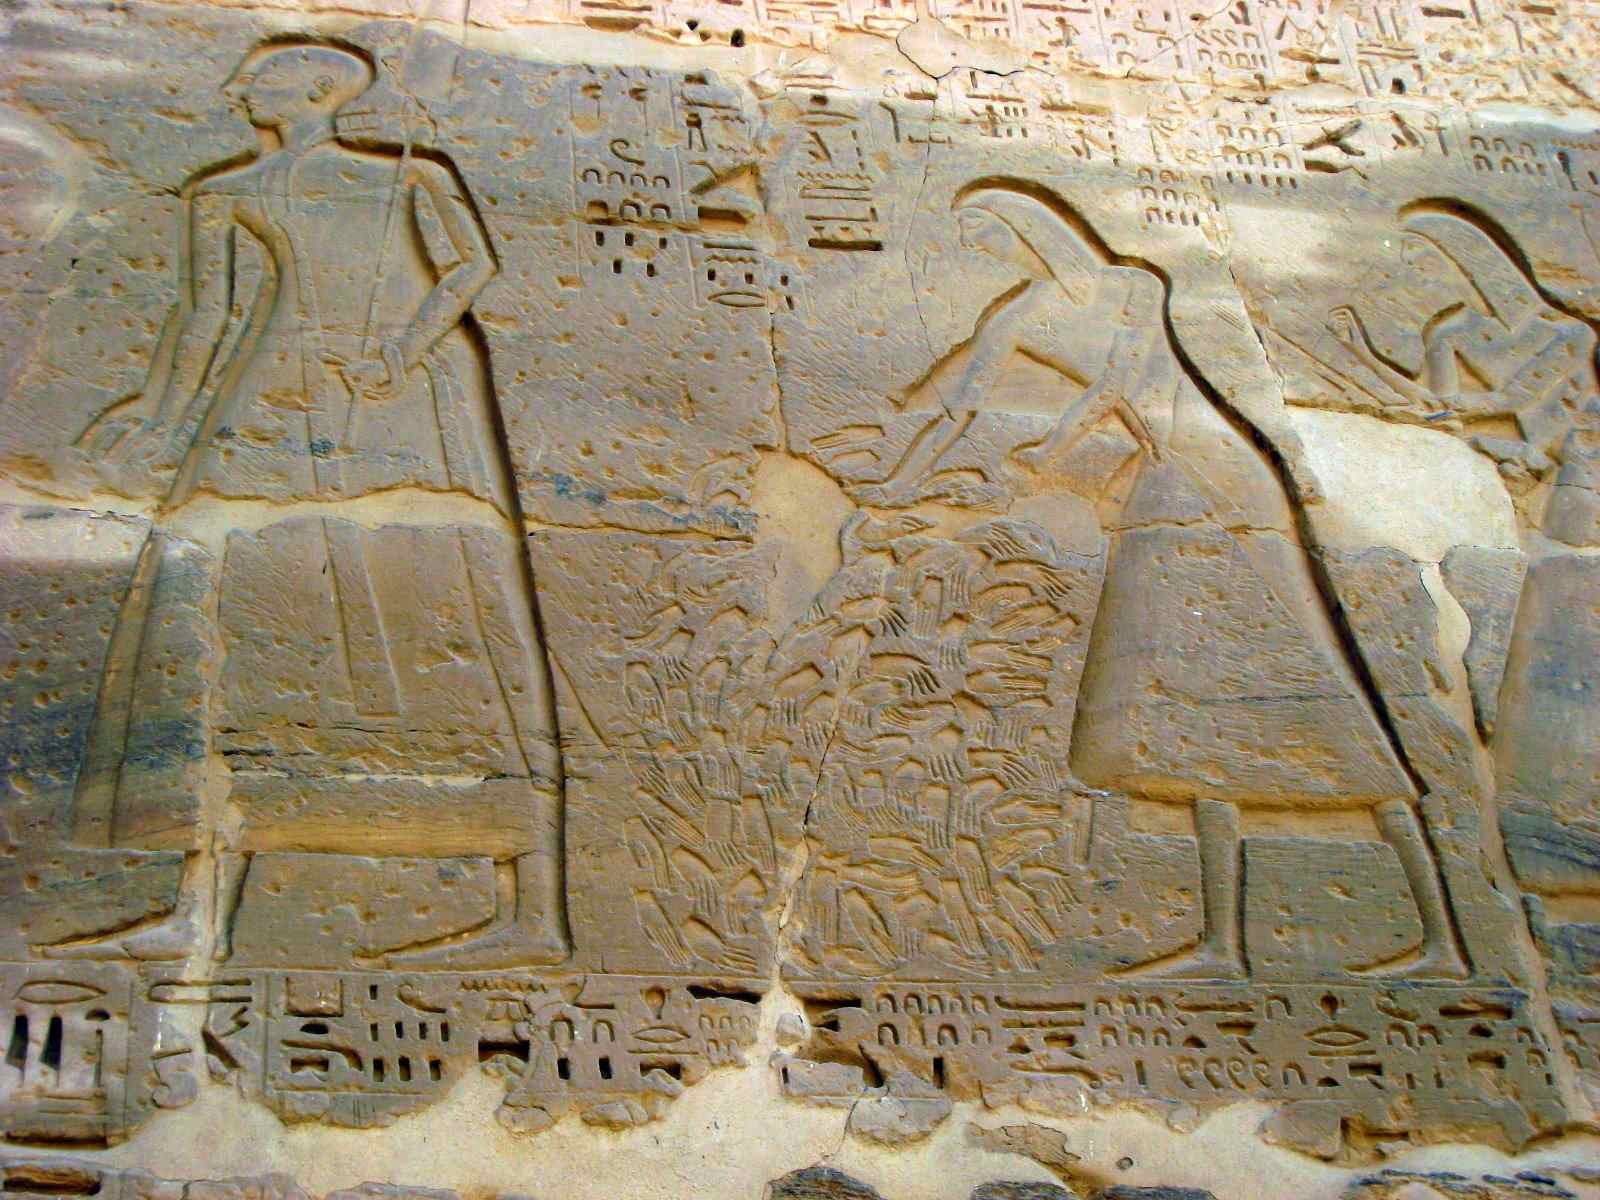 Ramesses III asked his army to deliver the severed hands of the enemy soldiers